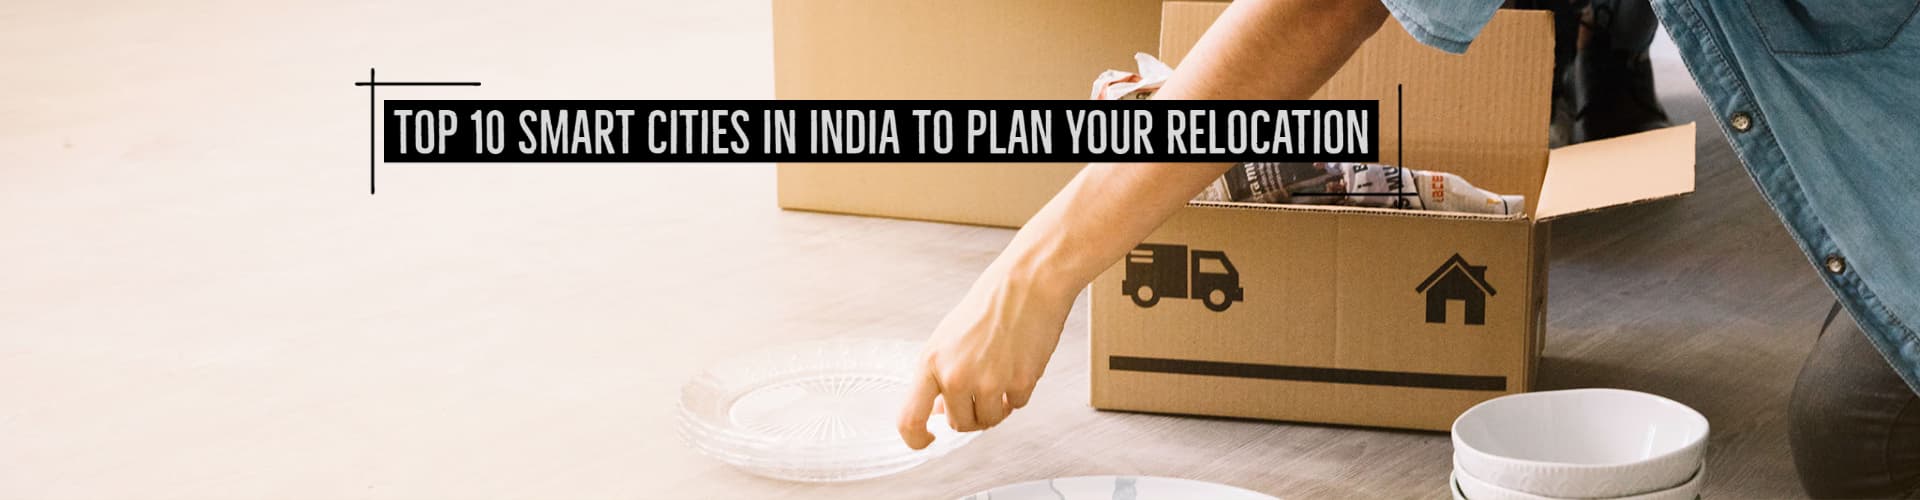 Top 10 Smart Cities In India To Plan Your Relocation